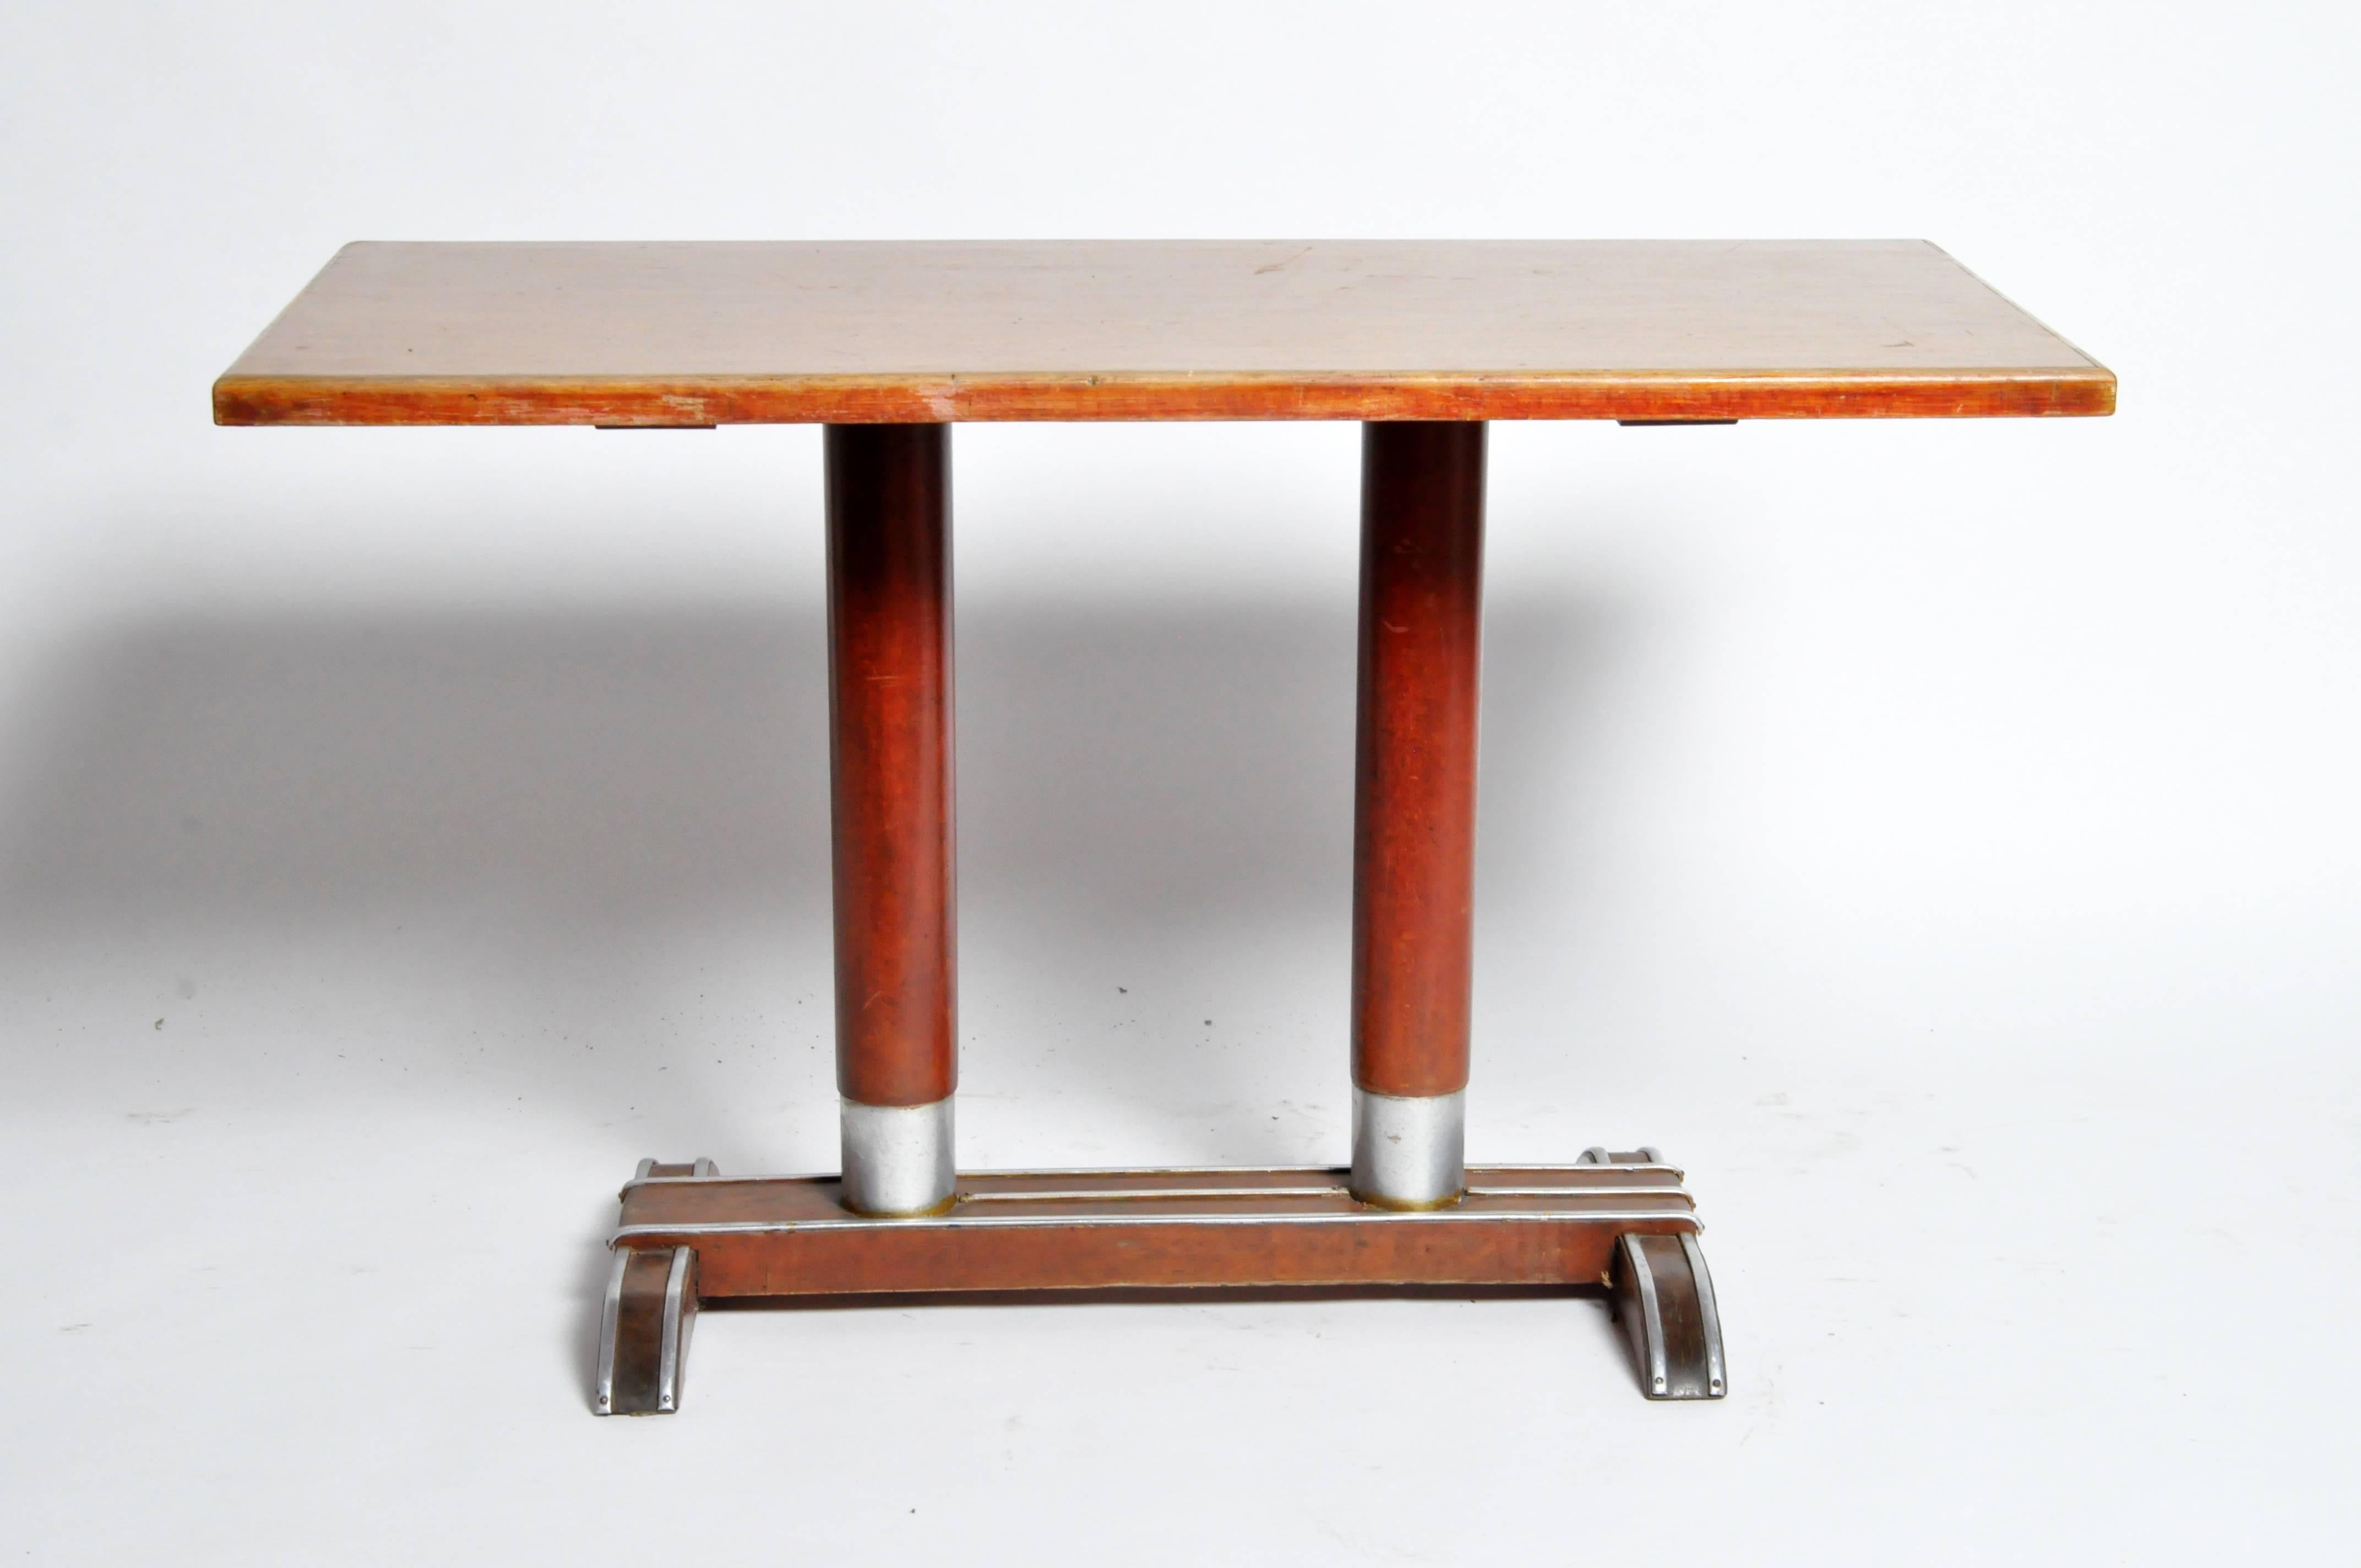 This Mid-Century Modern piece has a touch of Art Deco flare as seen in the “Streamline Moderne” metal trim decoration along the base. The rectangular top provides a sizeable work surface for use as a worktable or desk, and comfortably seats four if